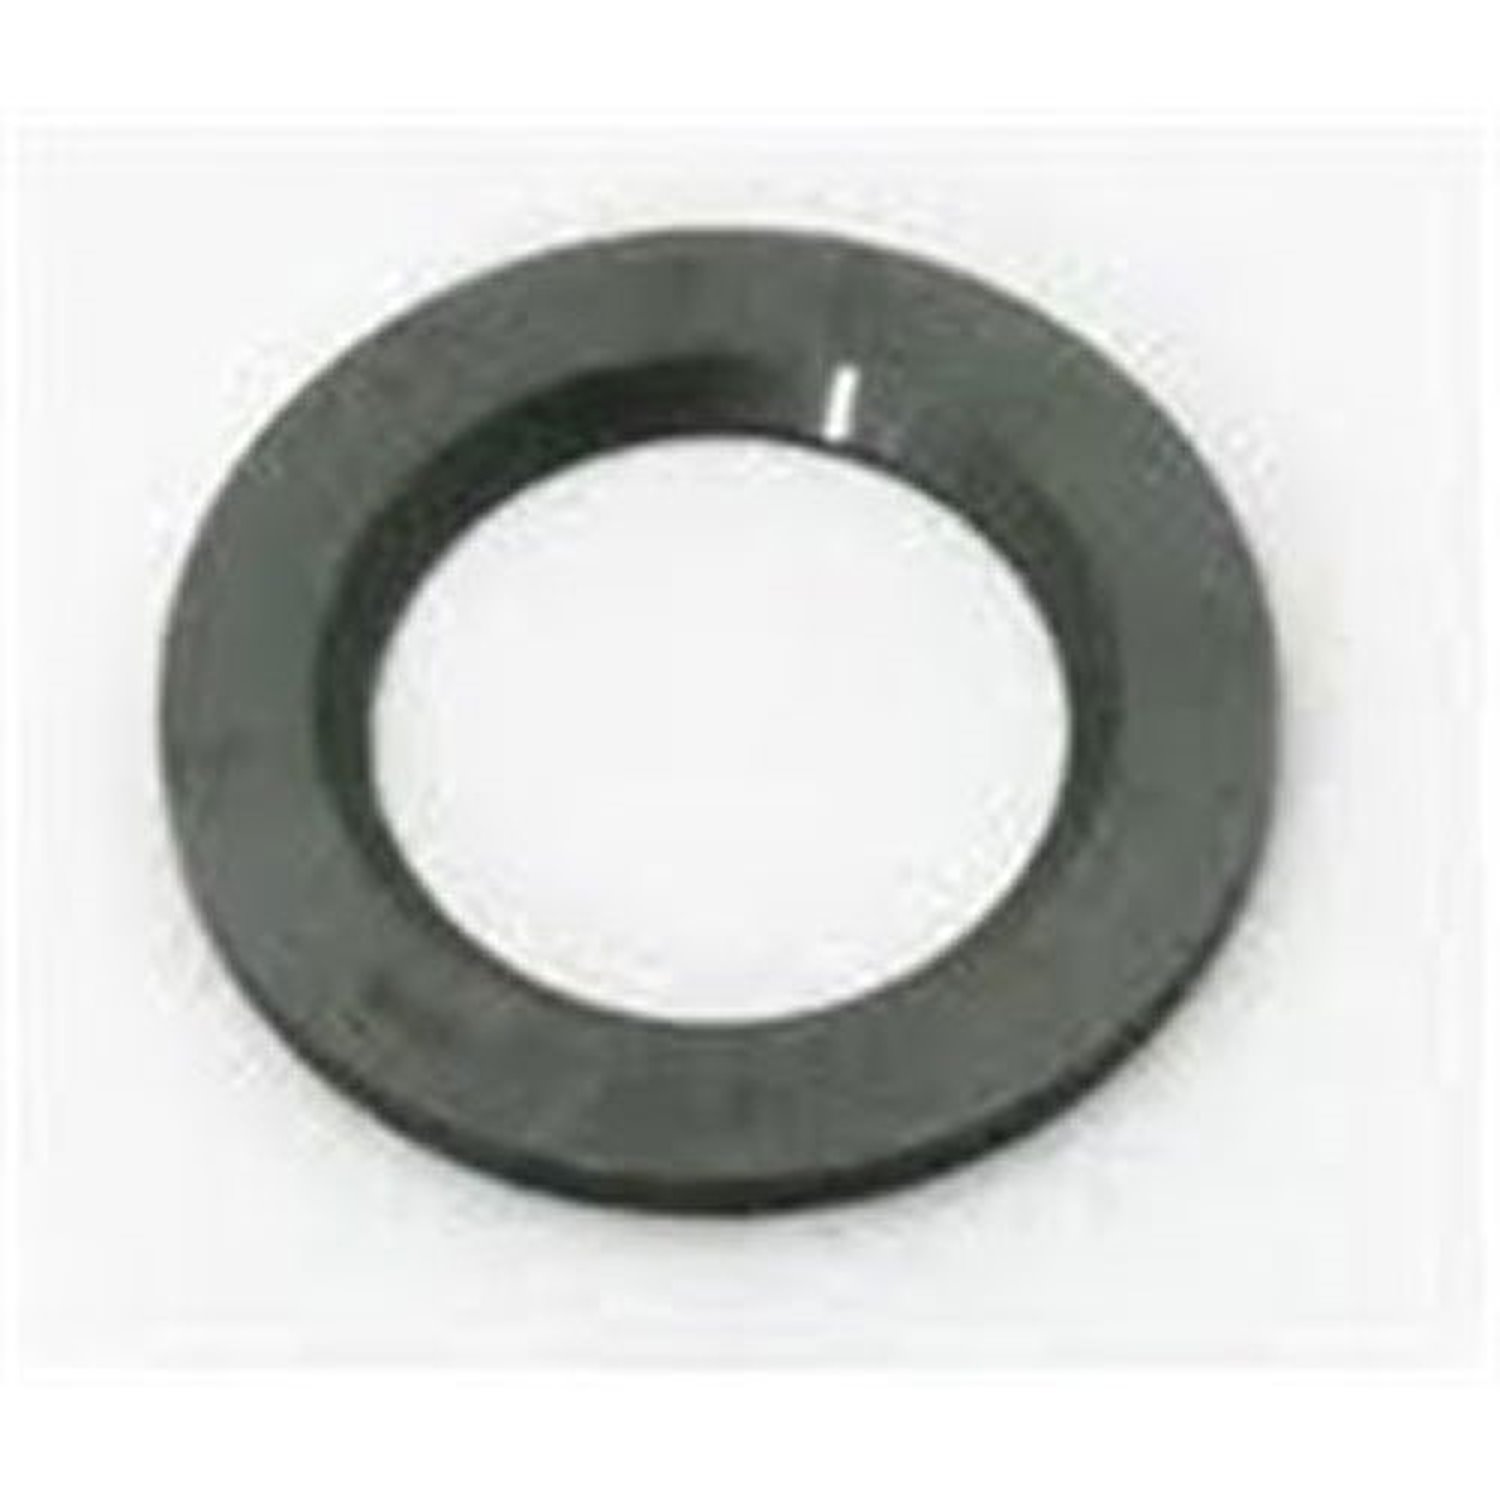 This plastic spindle thrust washer from Omix-ADA fits the Dana 30 front axle on 77-86 Jeep CJ models with disc brakes.